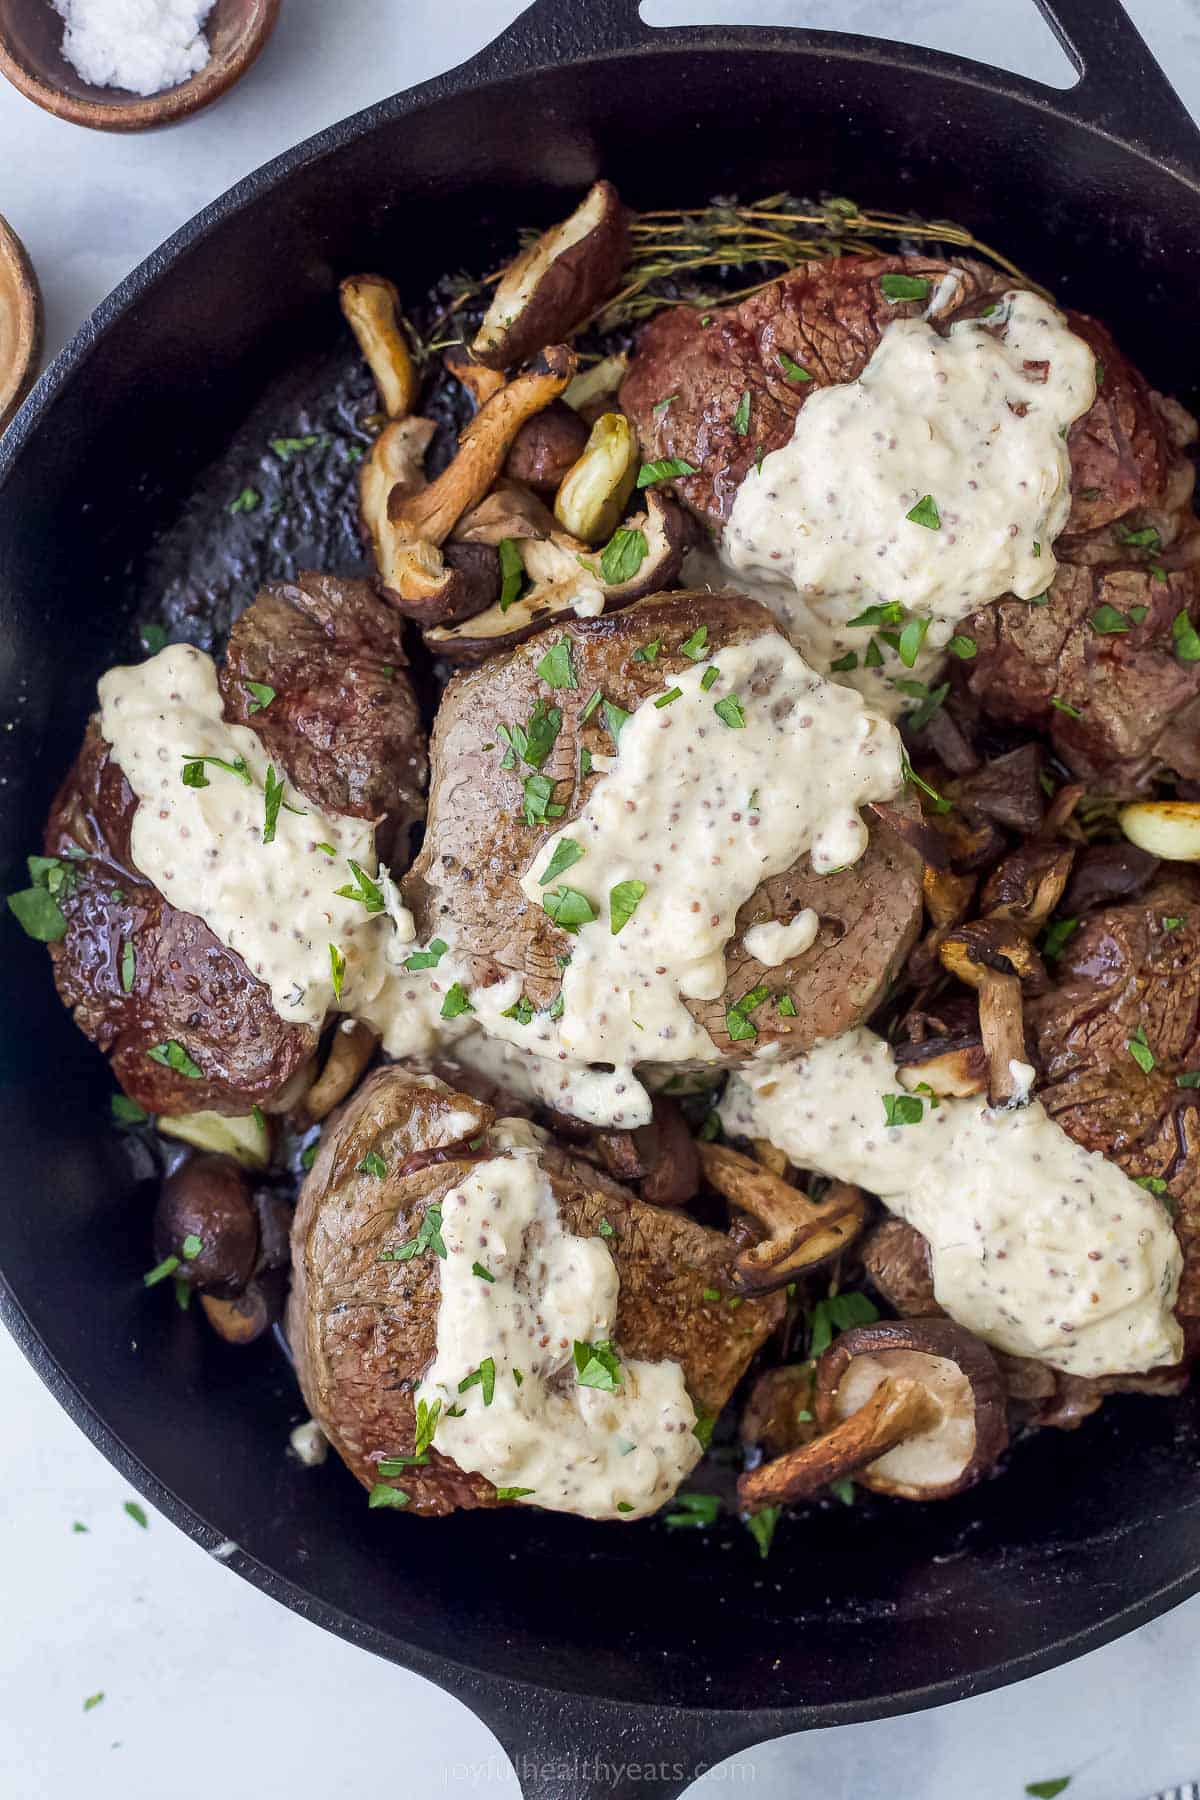 five filet mignon steaks with mushrooms and mustard sauce